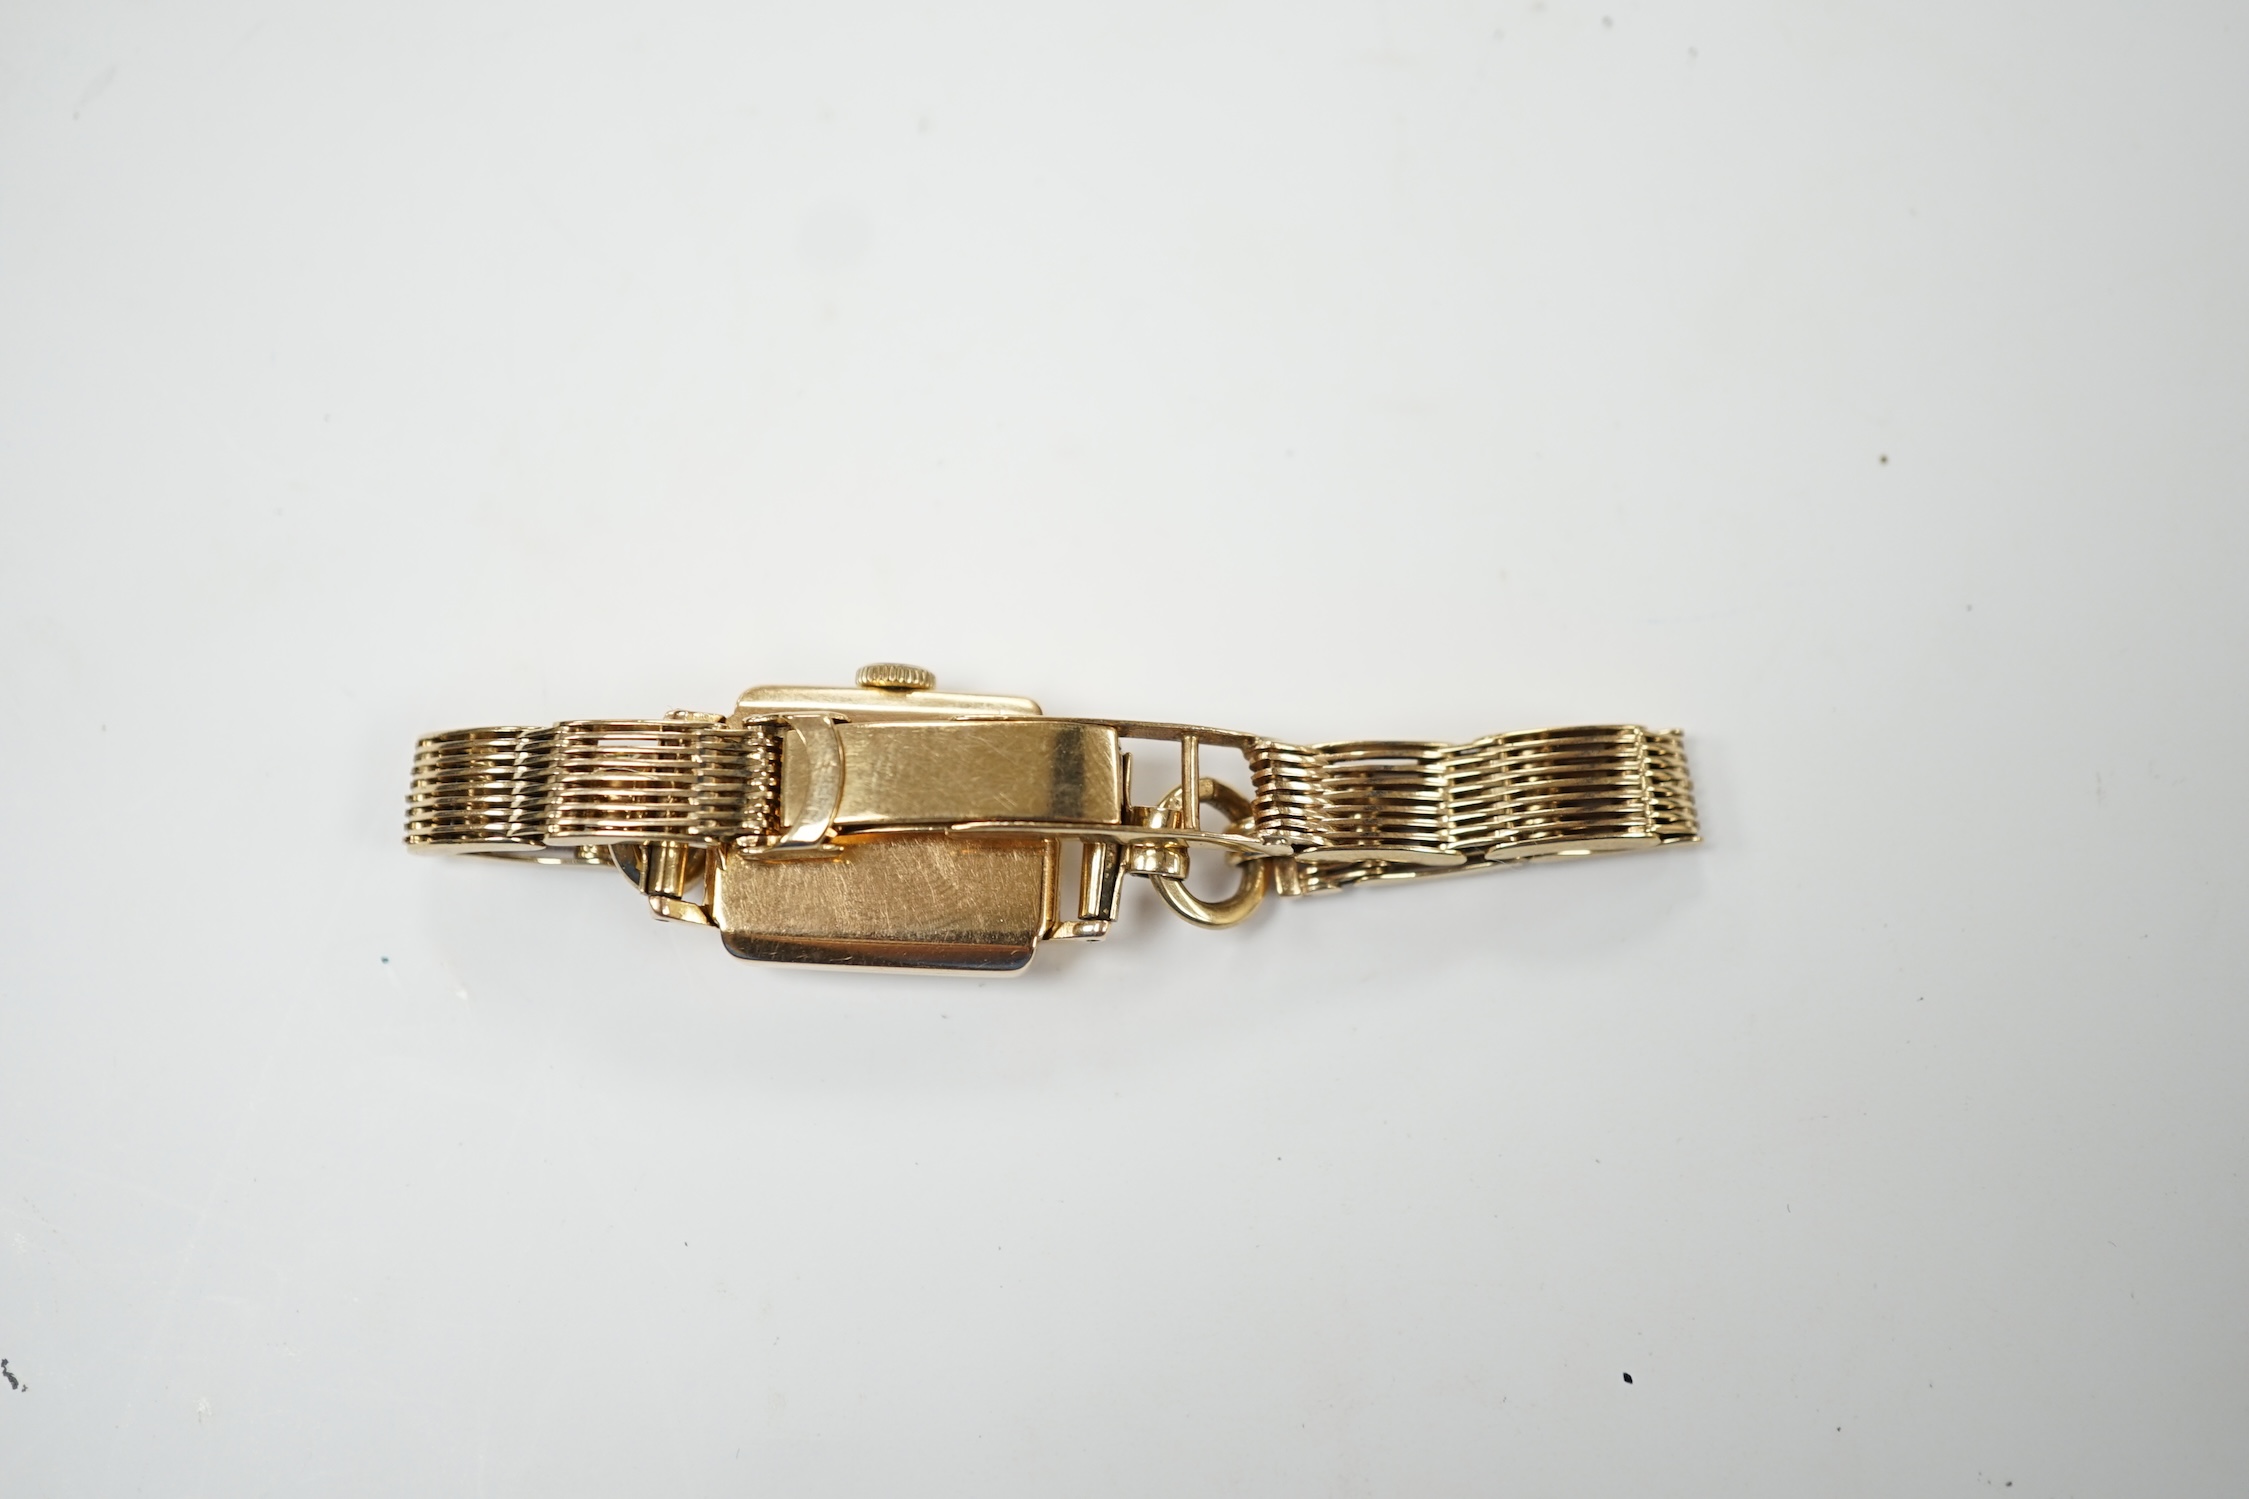 A lady's 18ct gold Movado manual wind wrist watch, on a 9ct gold bracelet. Fair condition